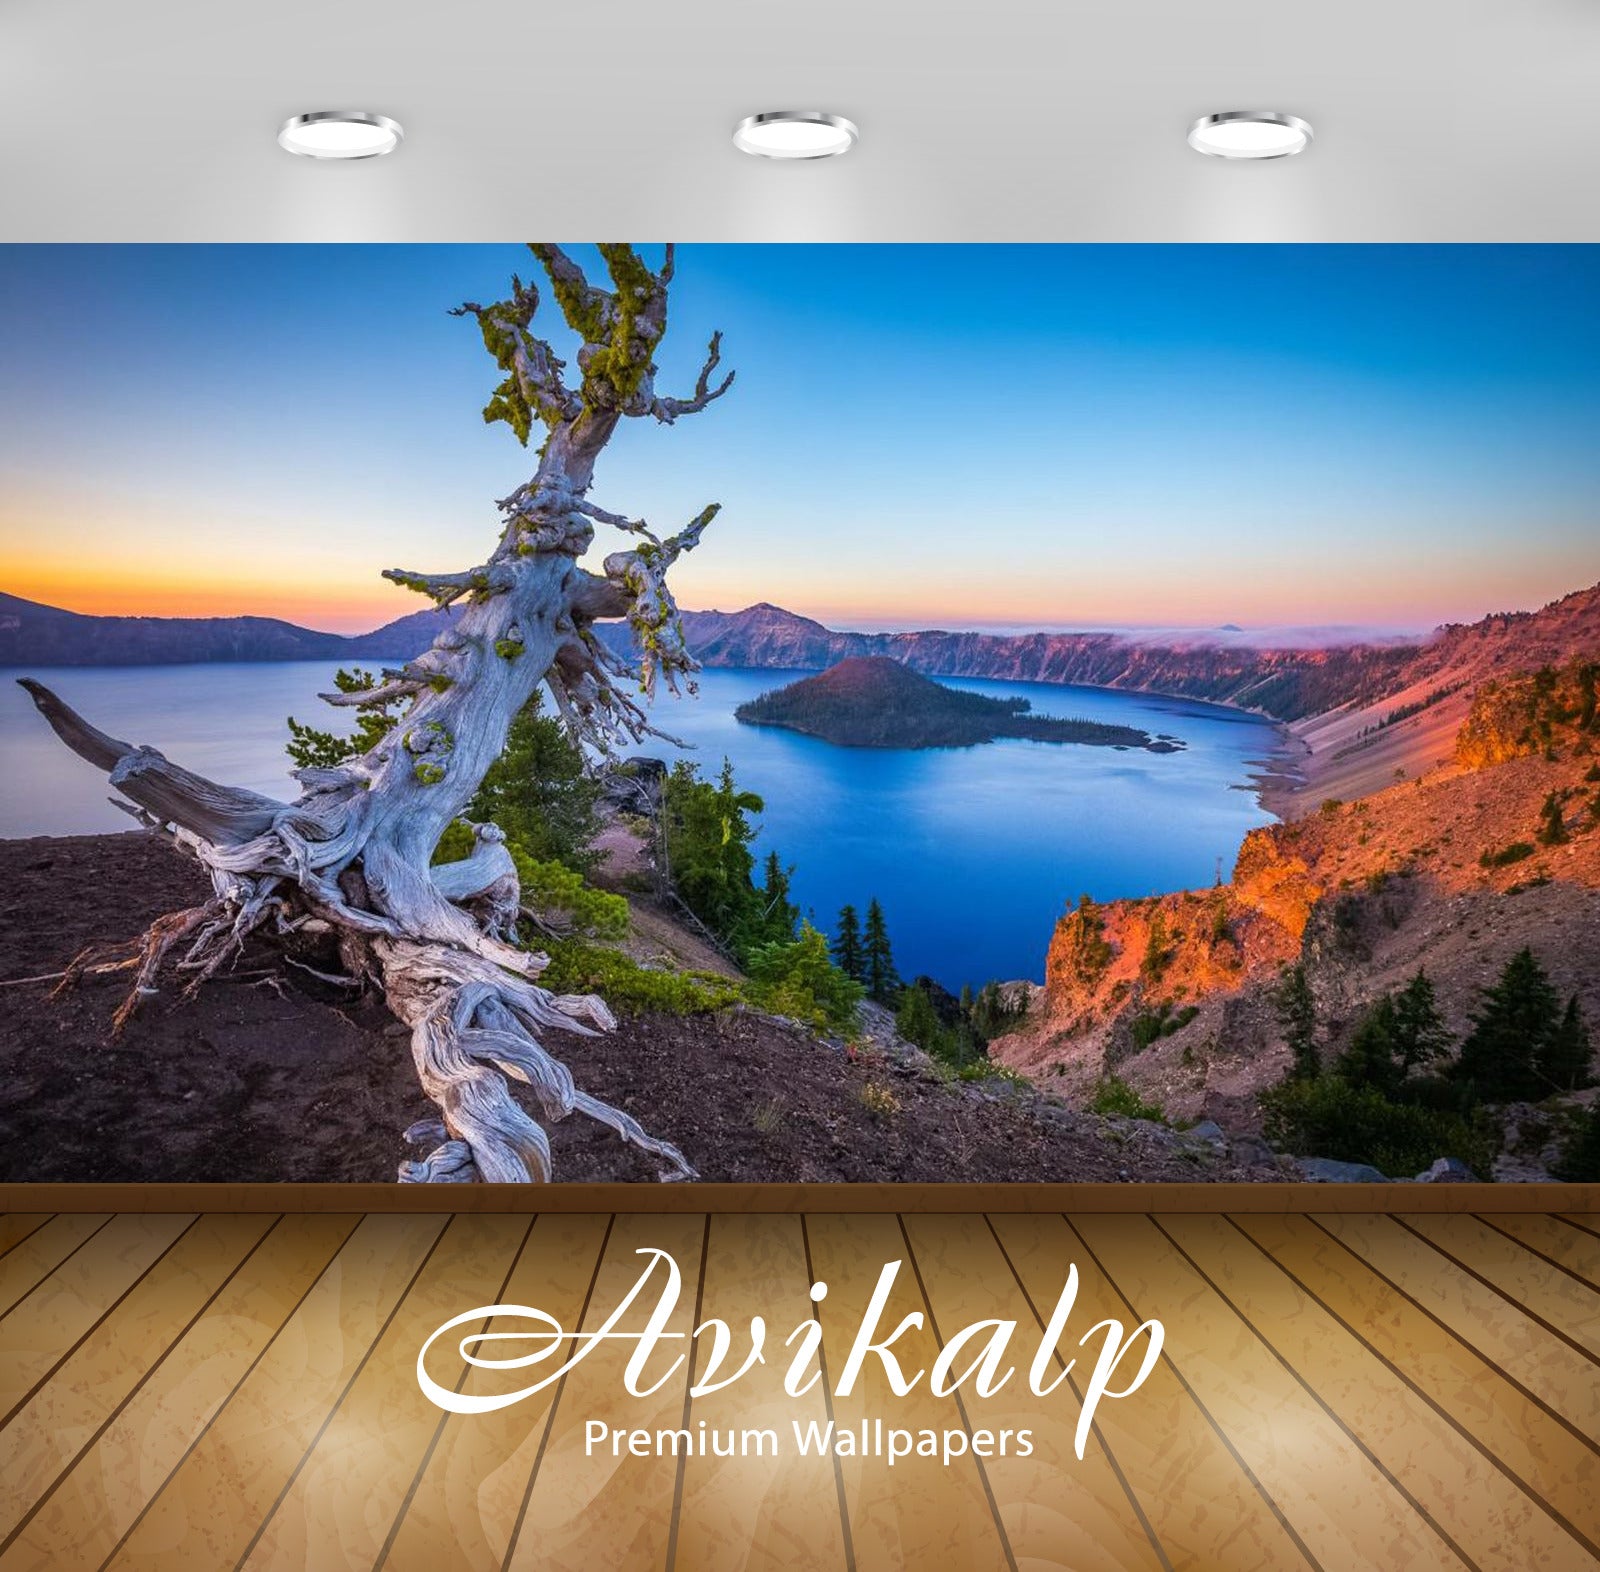 Avikalp Exclusive Awi2531 Crater Lake National Park Oregon Usa Full HD Wallpapers for Living room, H